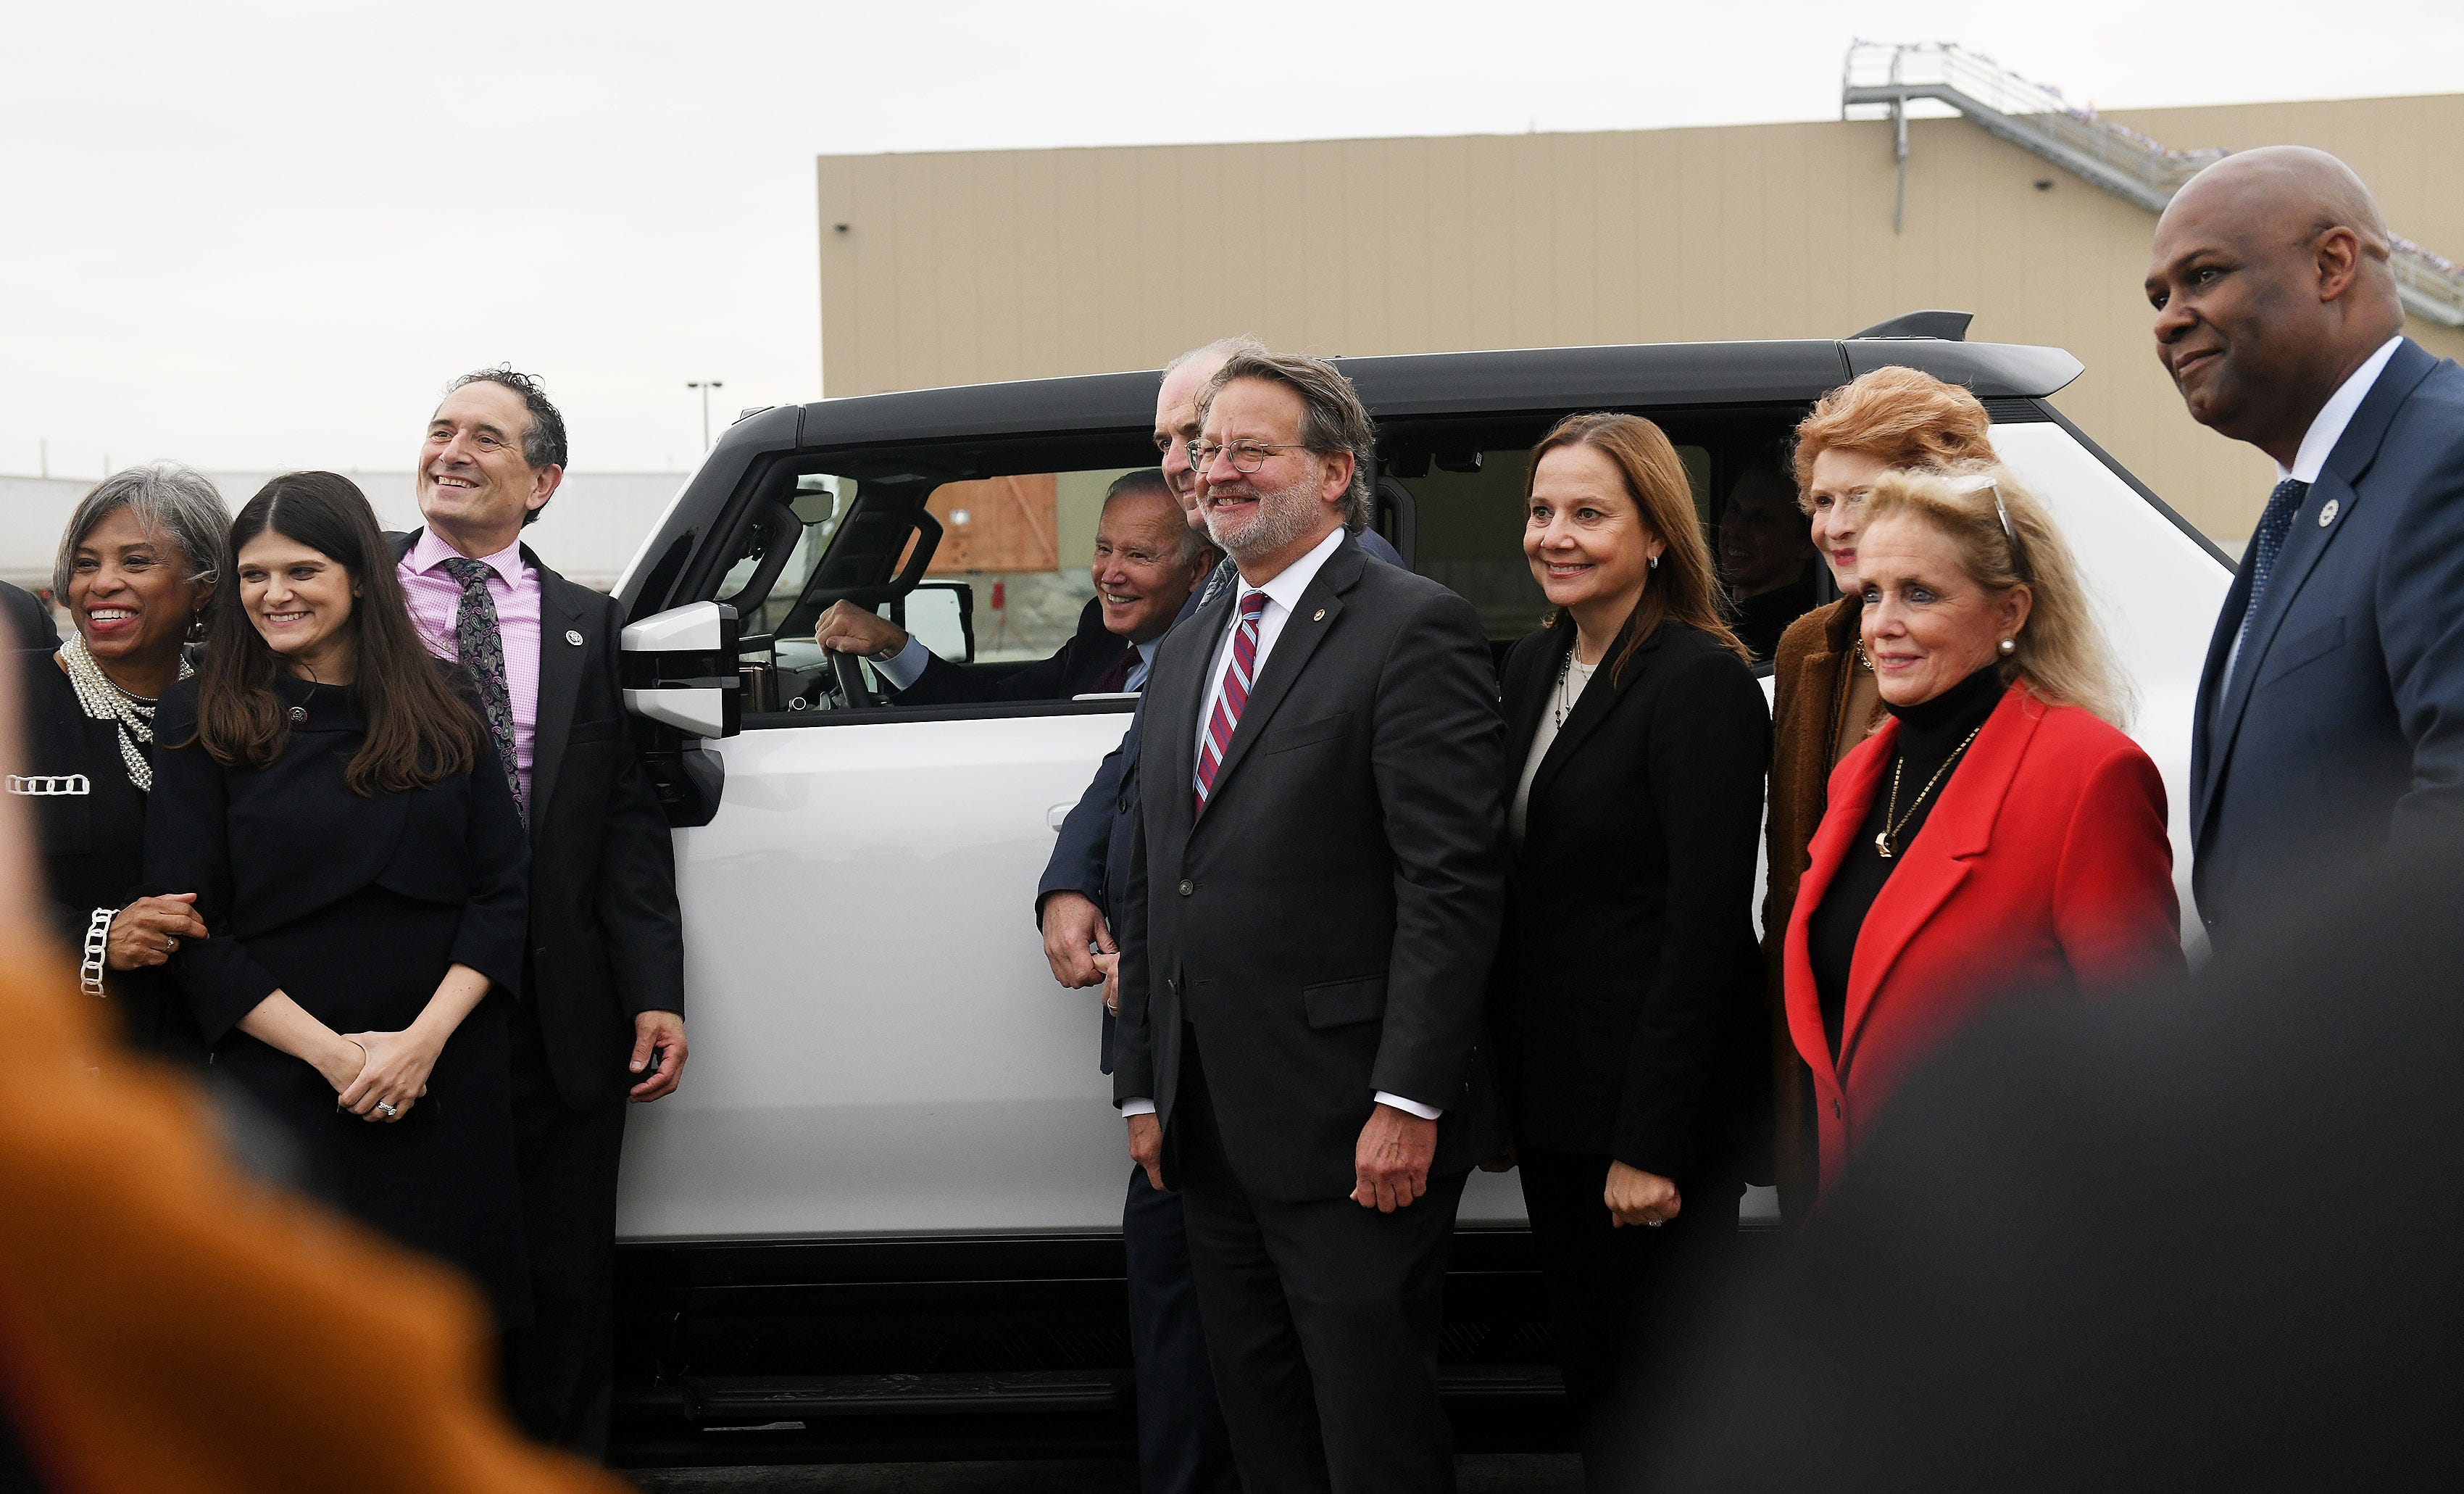 Behind the wheel, President Joe Biden is photographed with Washington lawmakers from Michigan, from left, Brenda Lawrence, Haley Stevens, Andy Levin, Dan Kildee, Gary Peters, GM CEO Mary Barra, Debbie Stabenow, Debbie Dingell and UAW Pres. Ray Curry at the General Motors Factory ZERO in Detroit  on Nov. 17, 2021.